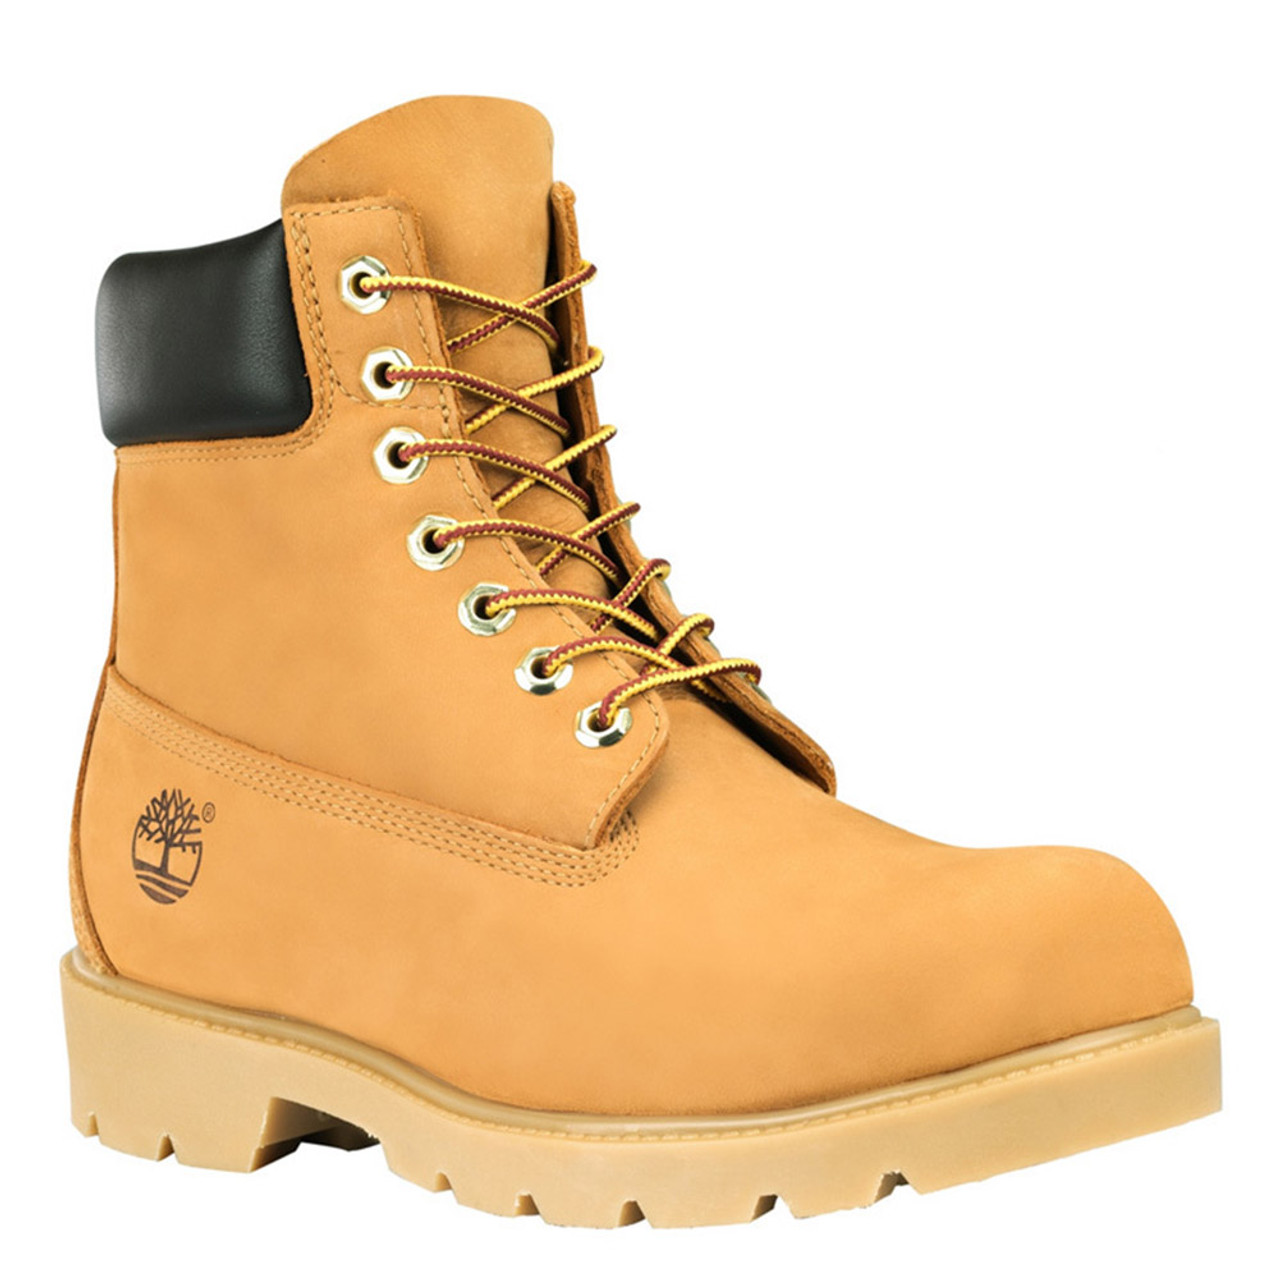 tims boots for men